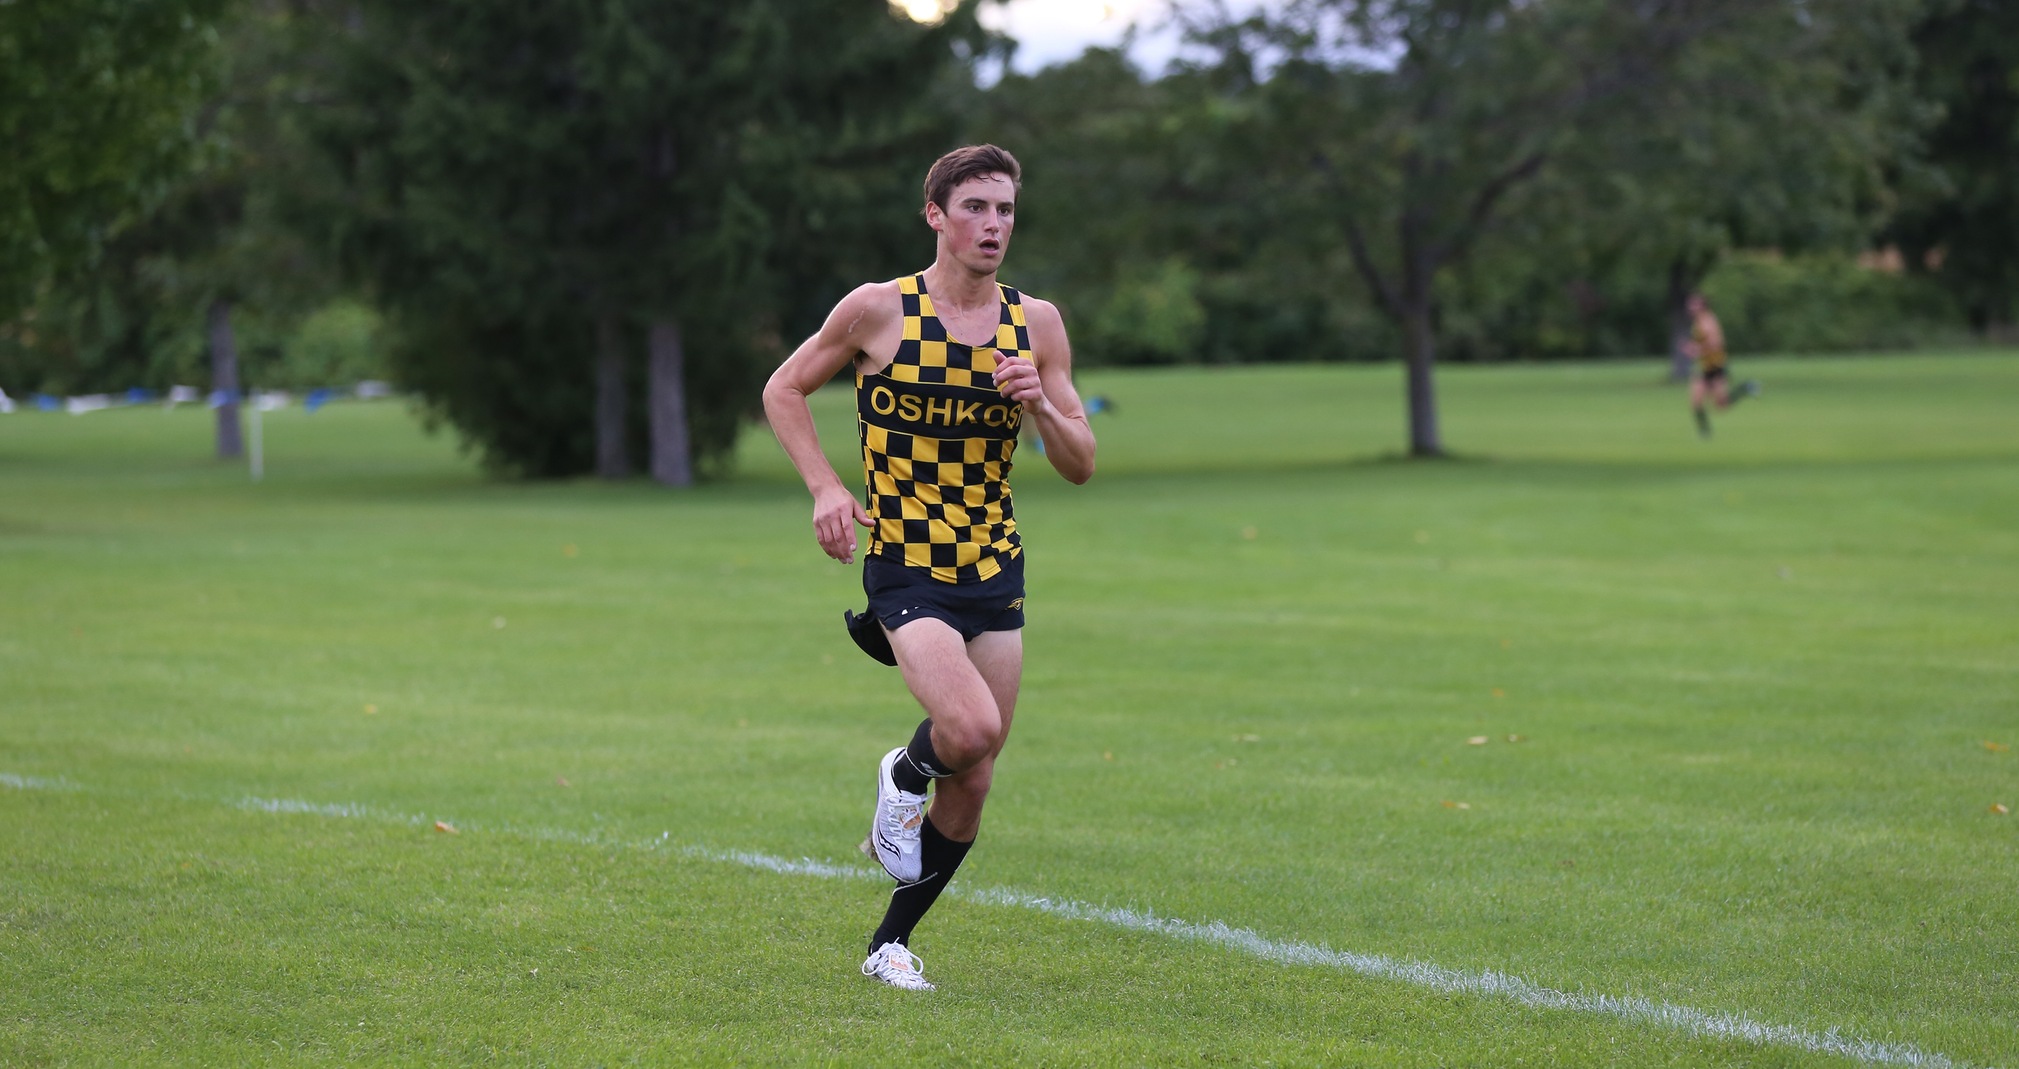 Lucas Weber took 21st-place at Saturday's Midwest Regional after finishing 37th in 2017.